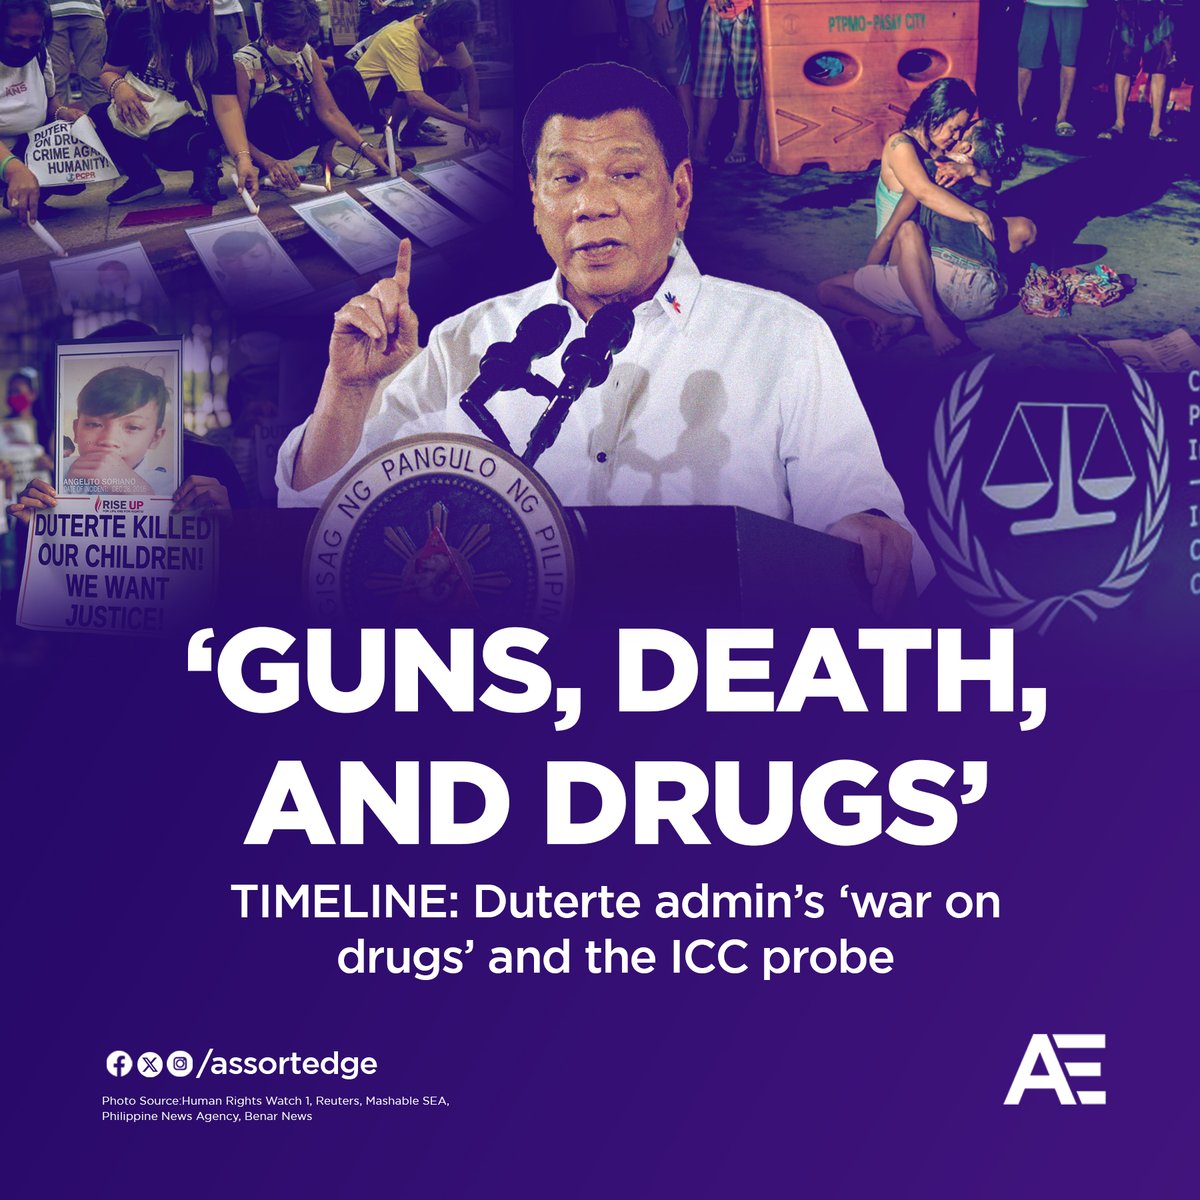 The government and its concerned agencies are currently preparing for a legal briefer for President Ferdinand Marcos in case the International Criminal Court (ICC) orders an arrest warrant against Former President Rodrigo Duterte. But how did the case escalate and what has